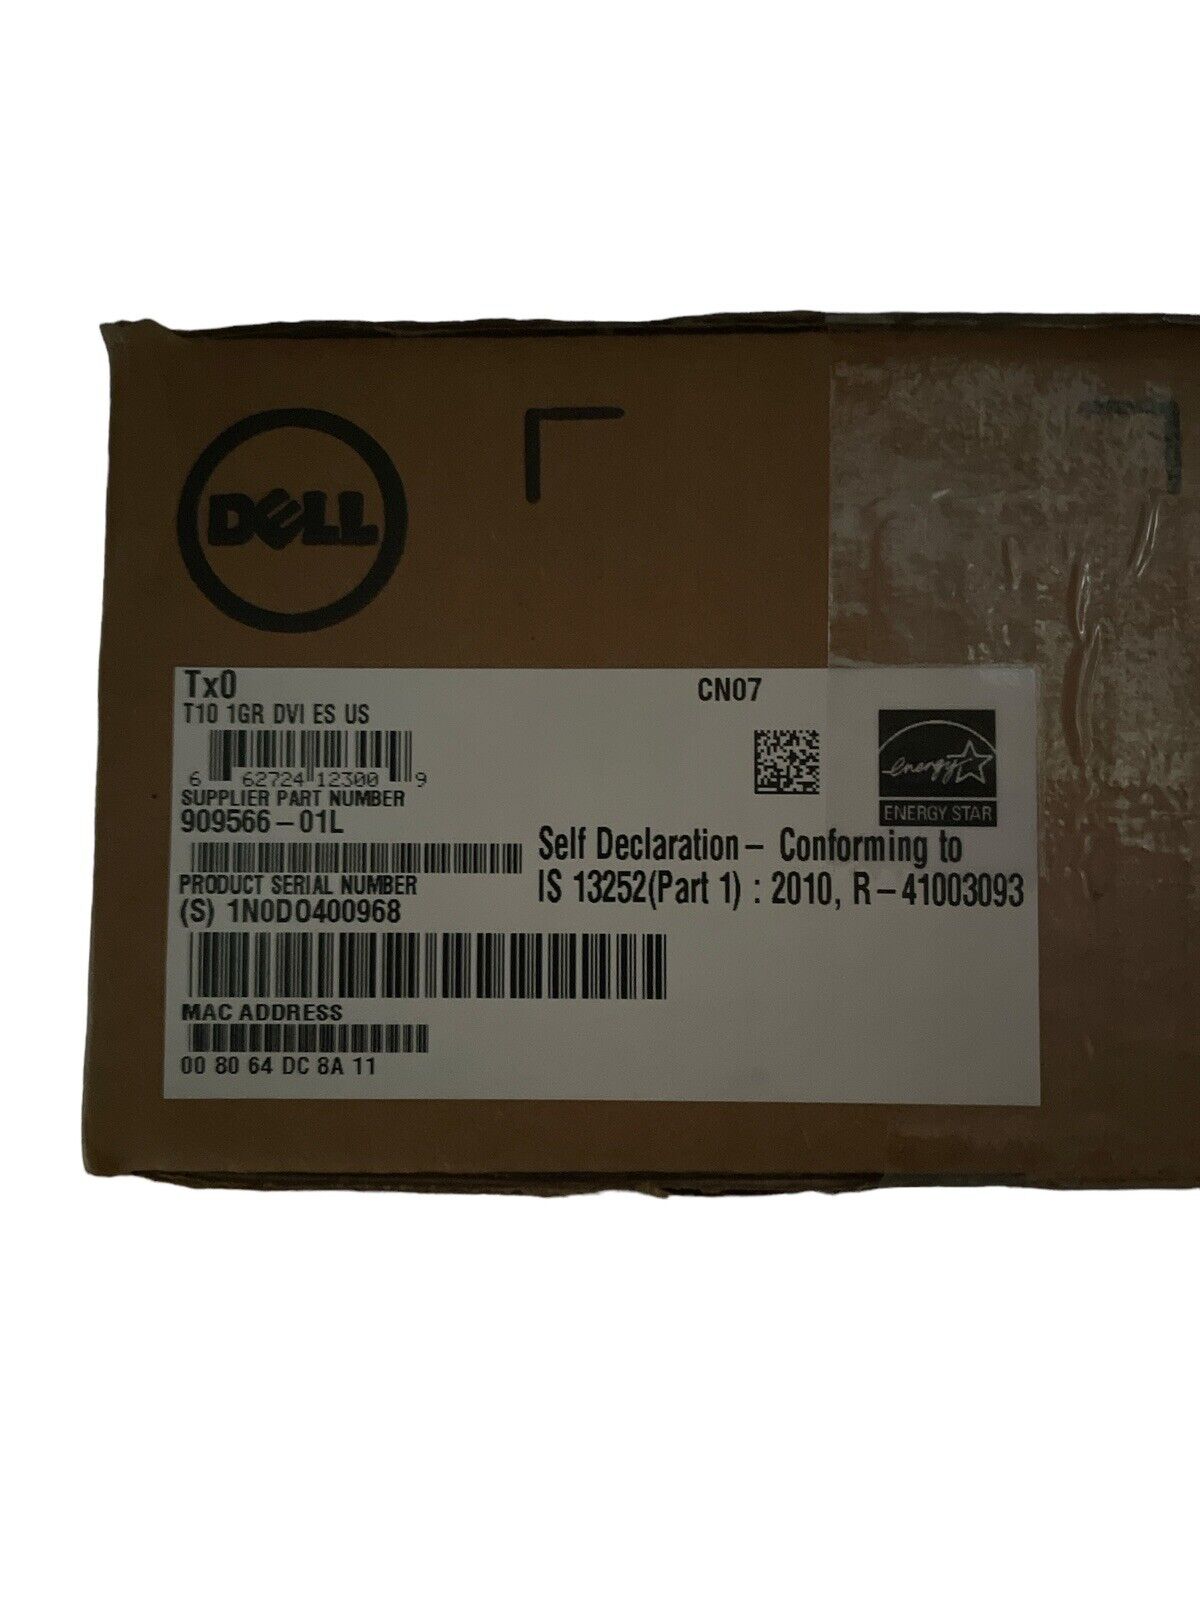 Dell Wyse Thin Client (Model: Tx0) NEW Sealed Old Stock